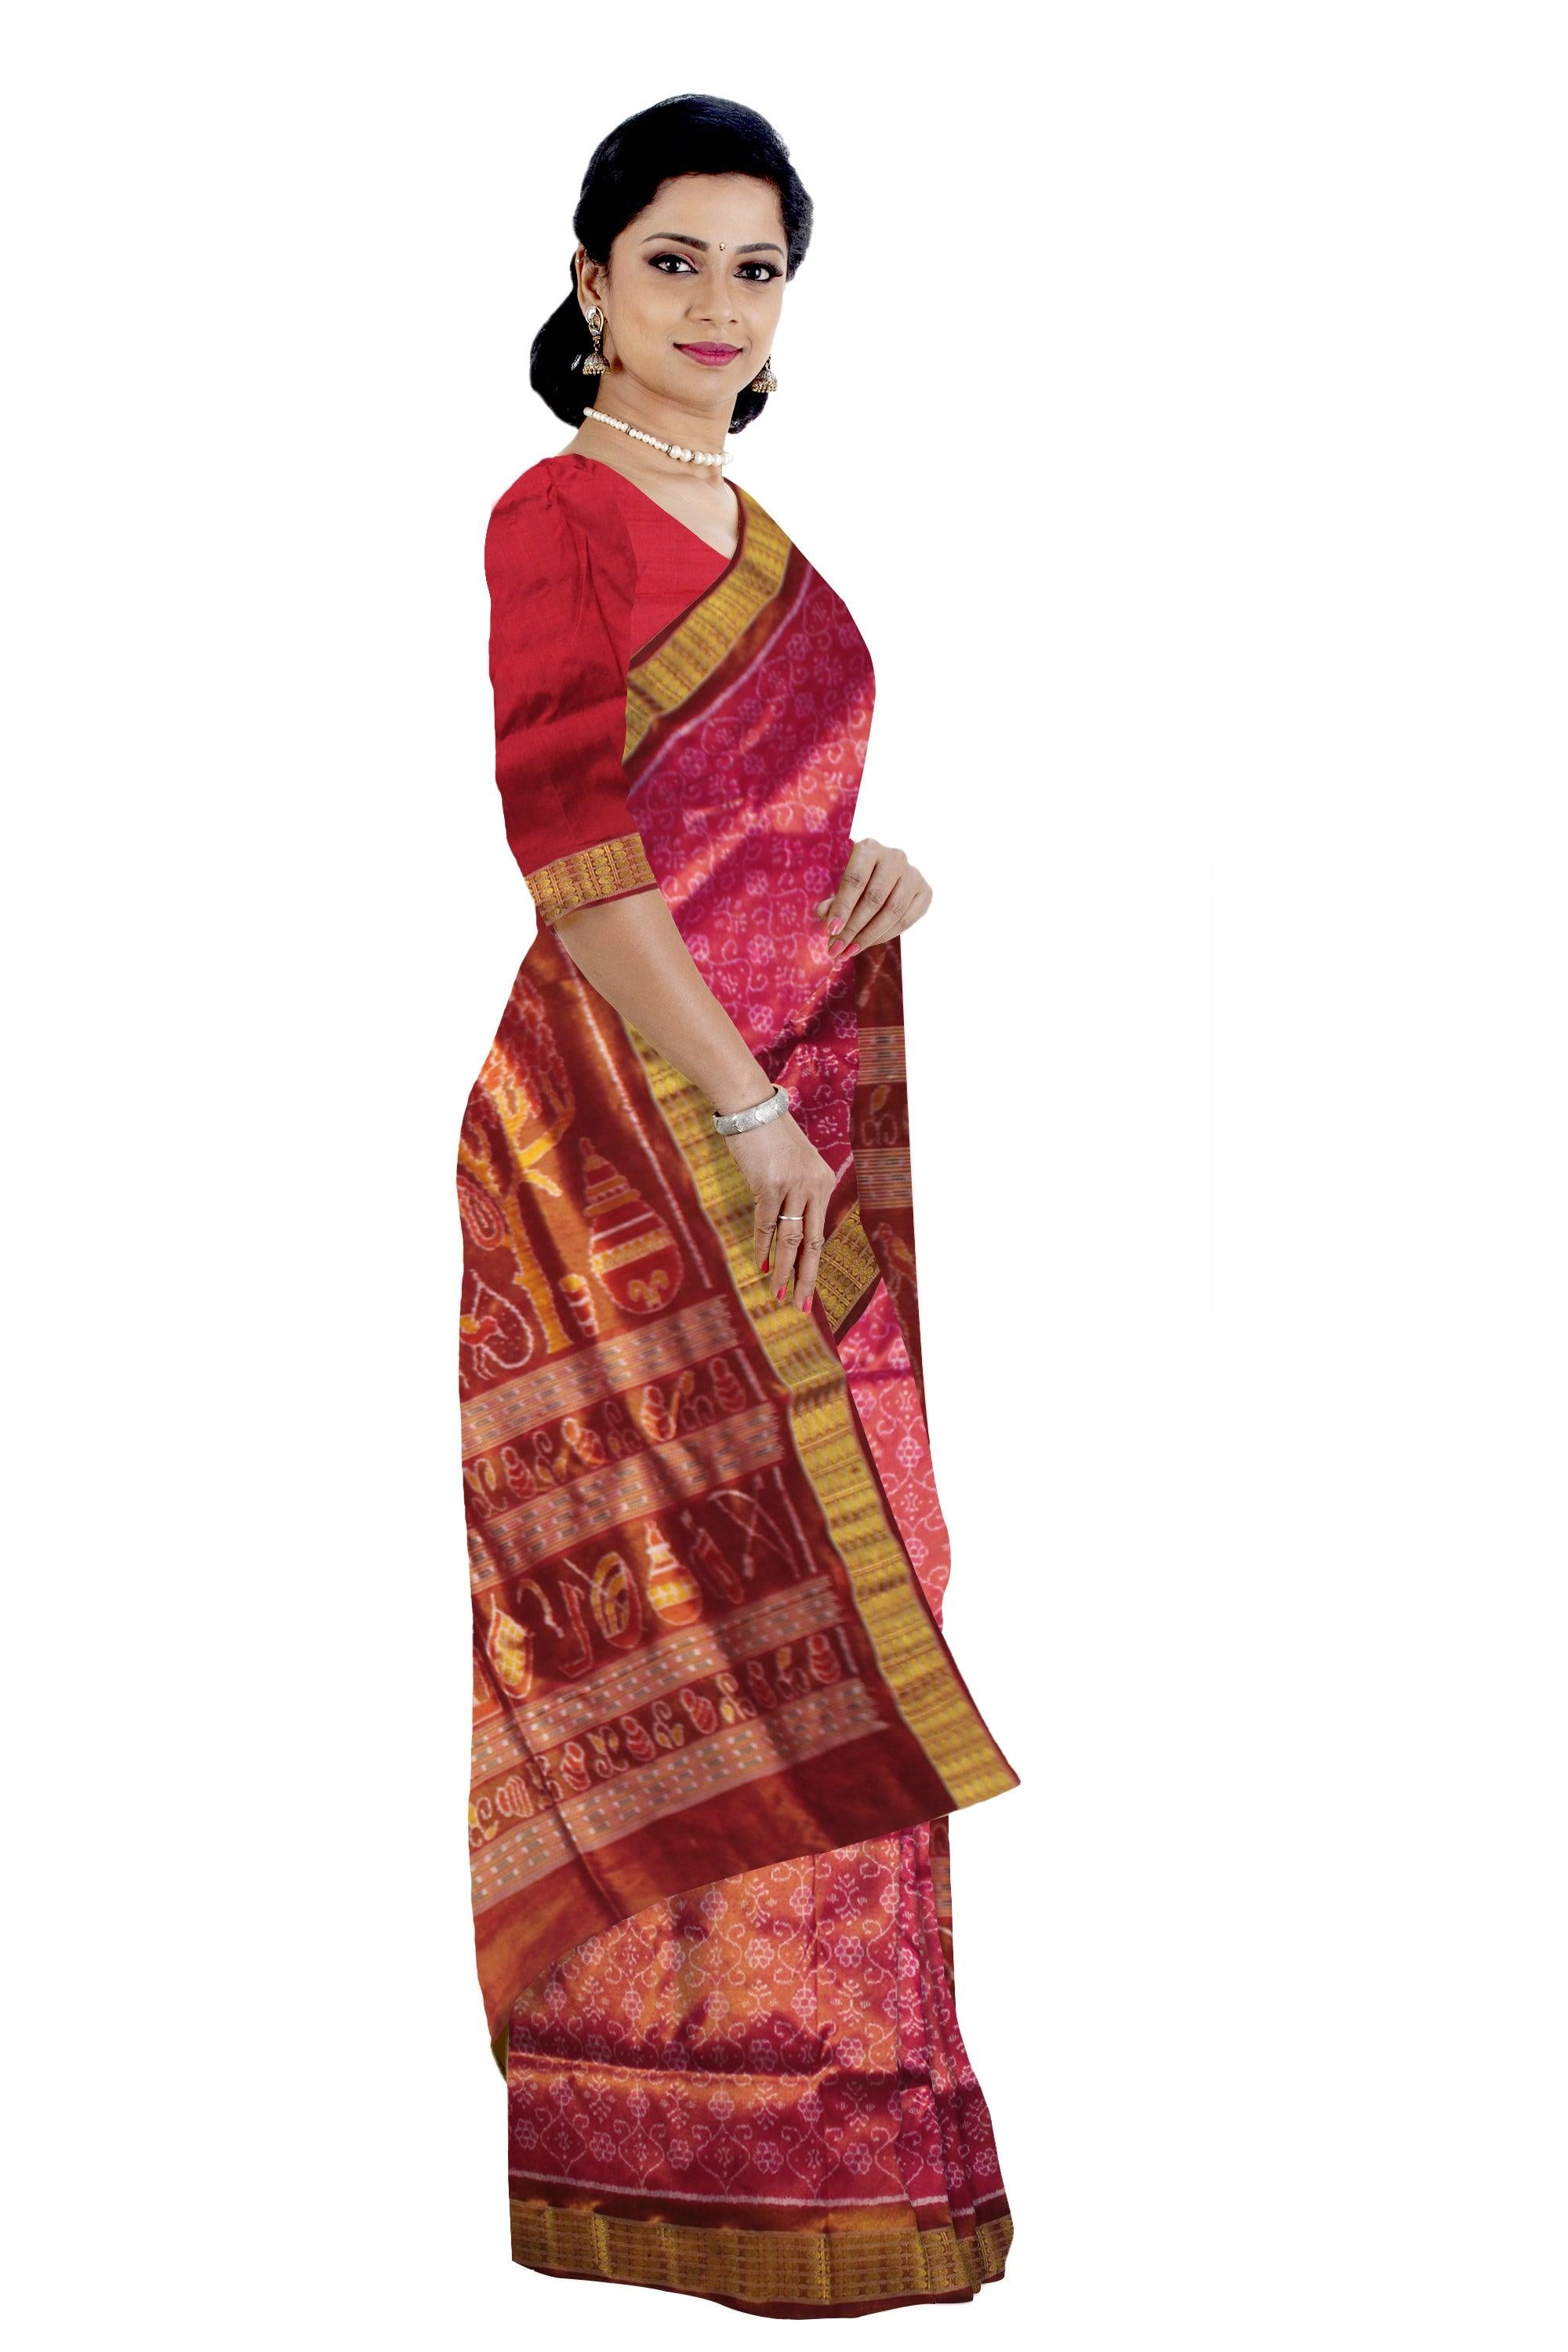 Marriage collections Tissue Silk Saree in Floral  Design in HOT PINK  WITH BLOUSE - Koshali Arts & Crafts Enterprise